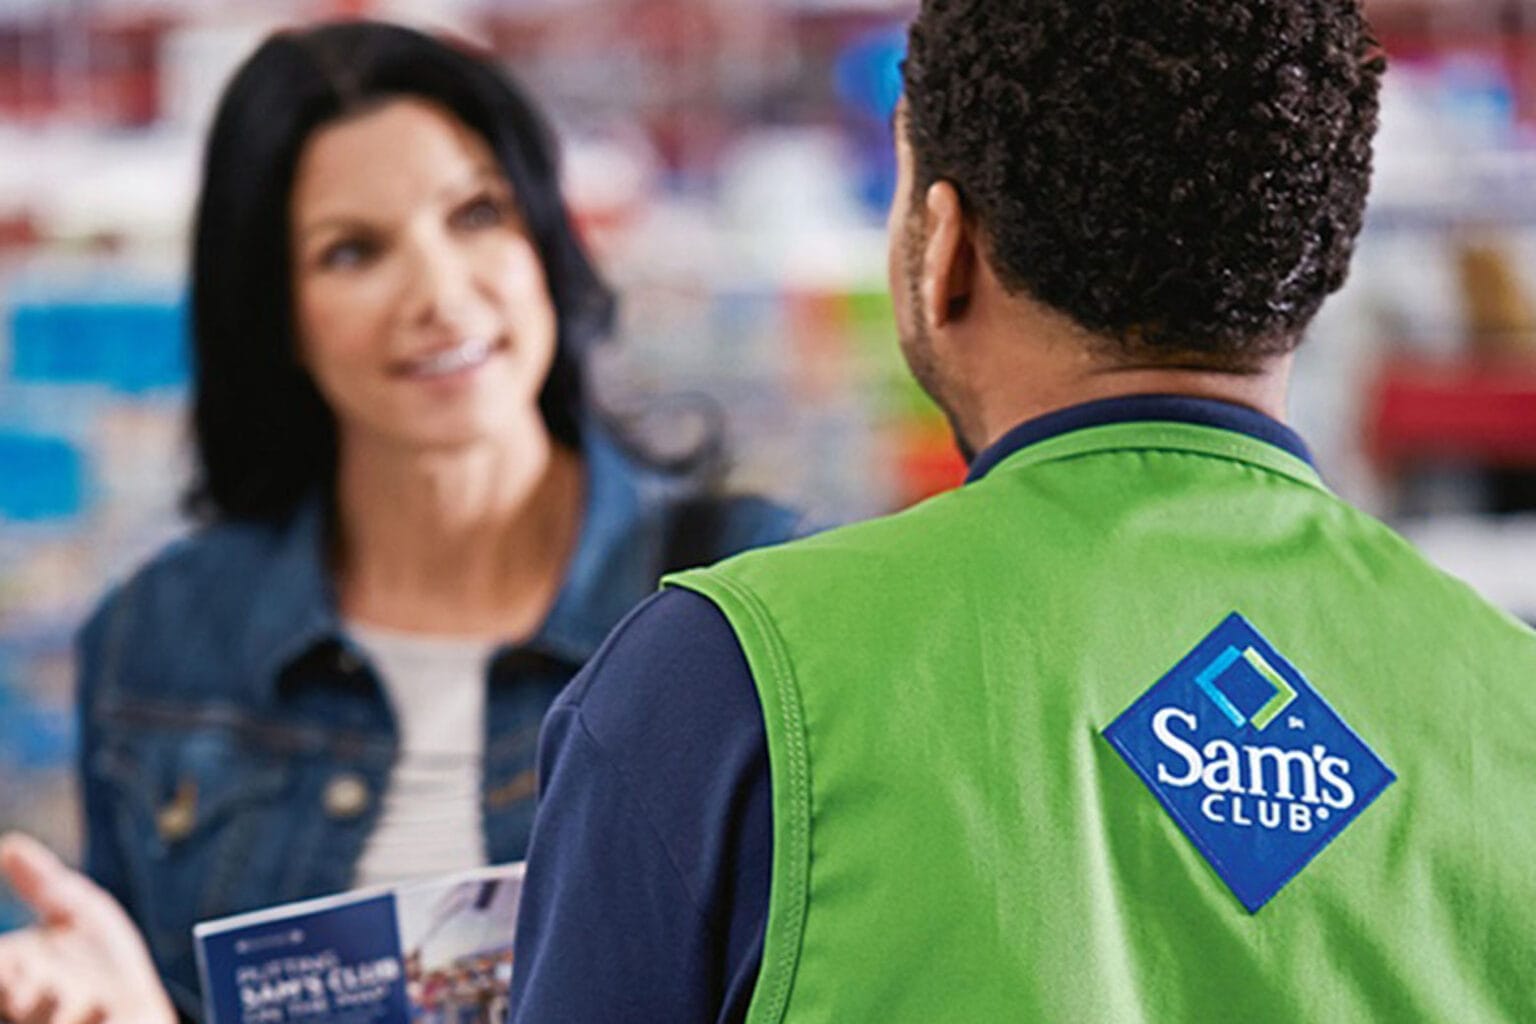 Enjoy premium products at a discount with this Sam's Club membership